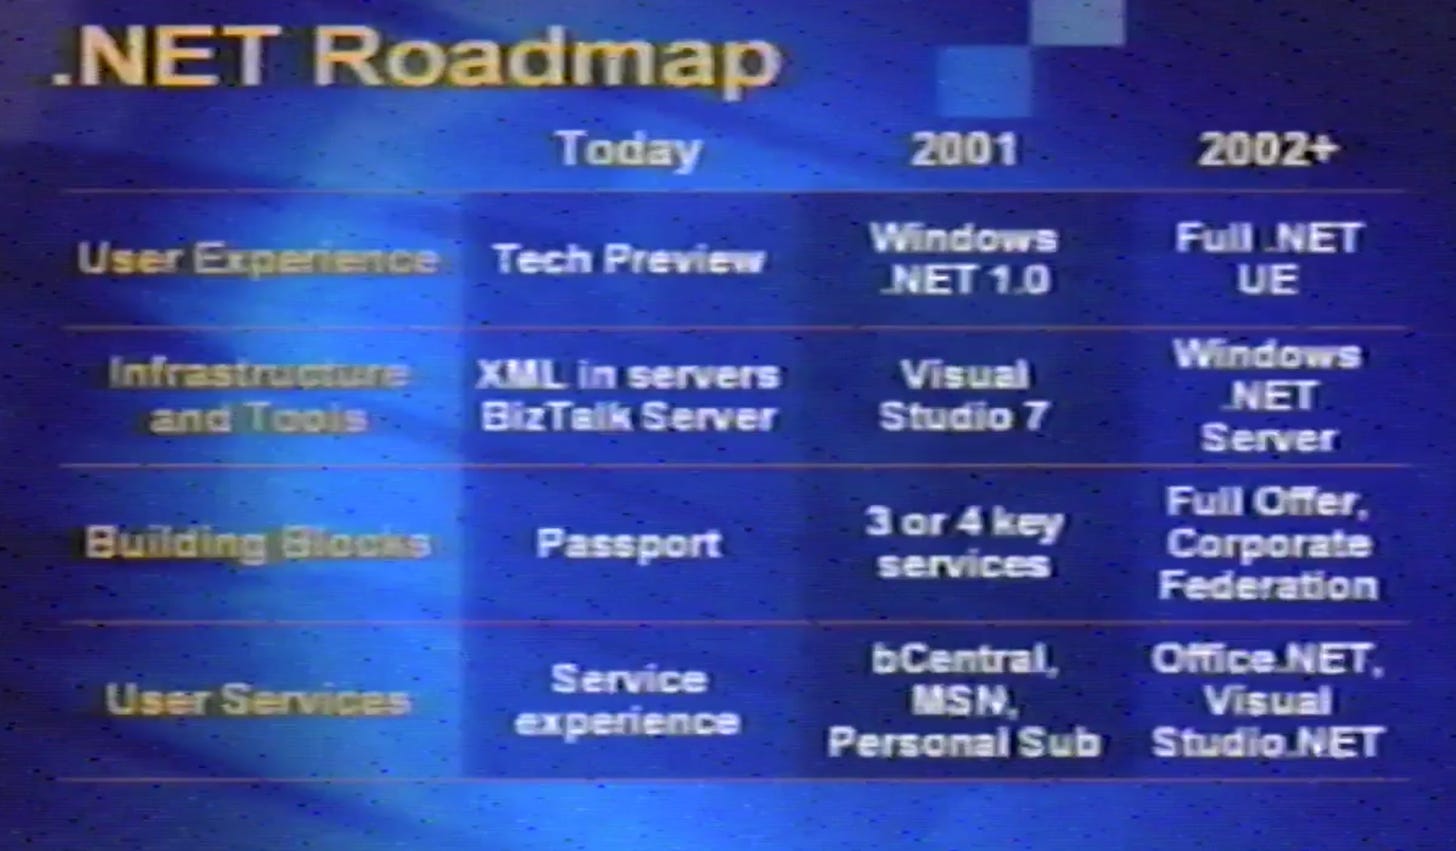 The .NET Roadmap featuring user experience, infrastructure and tools, building blocks, user services with columns and product names for Today, 2001, 2002+.